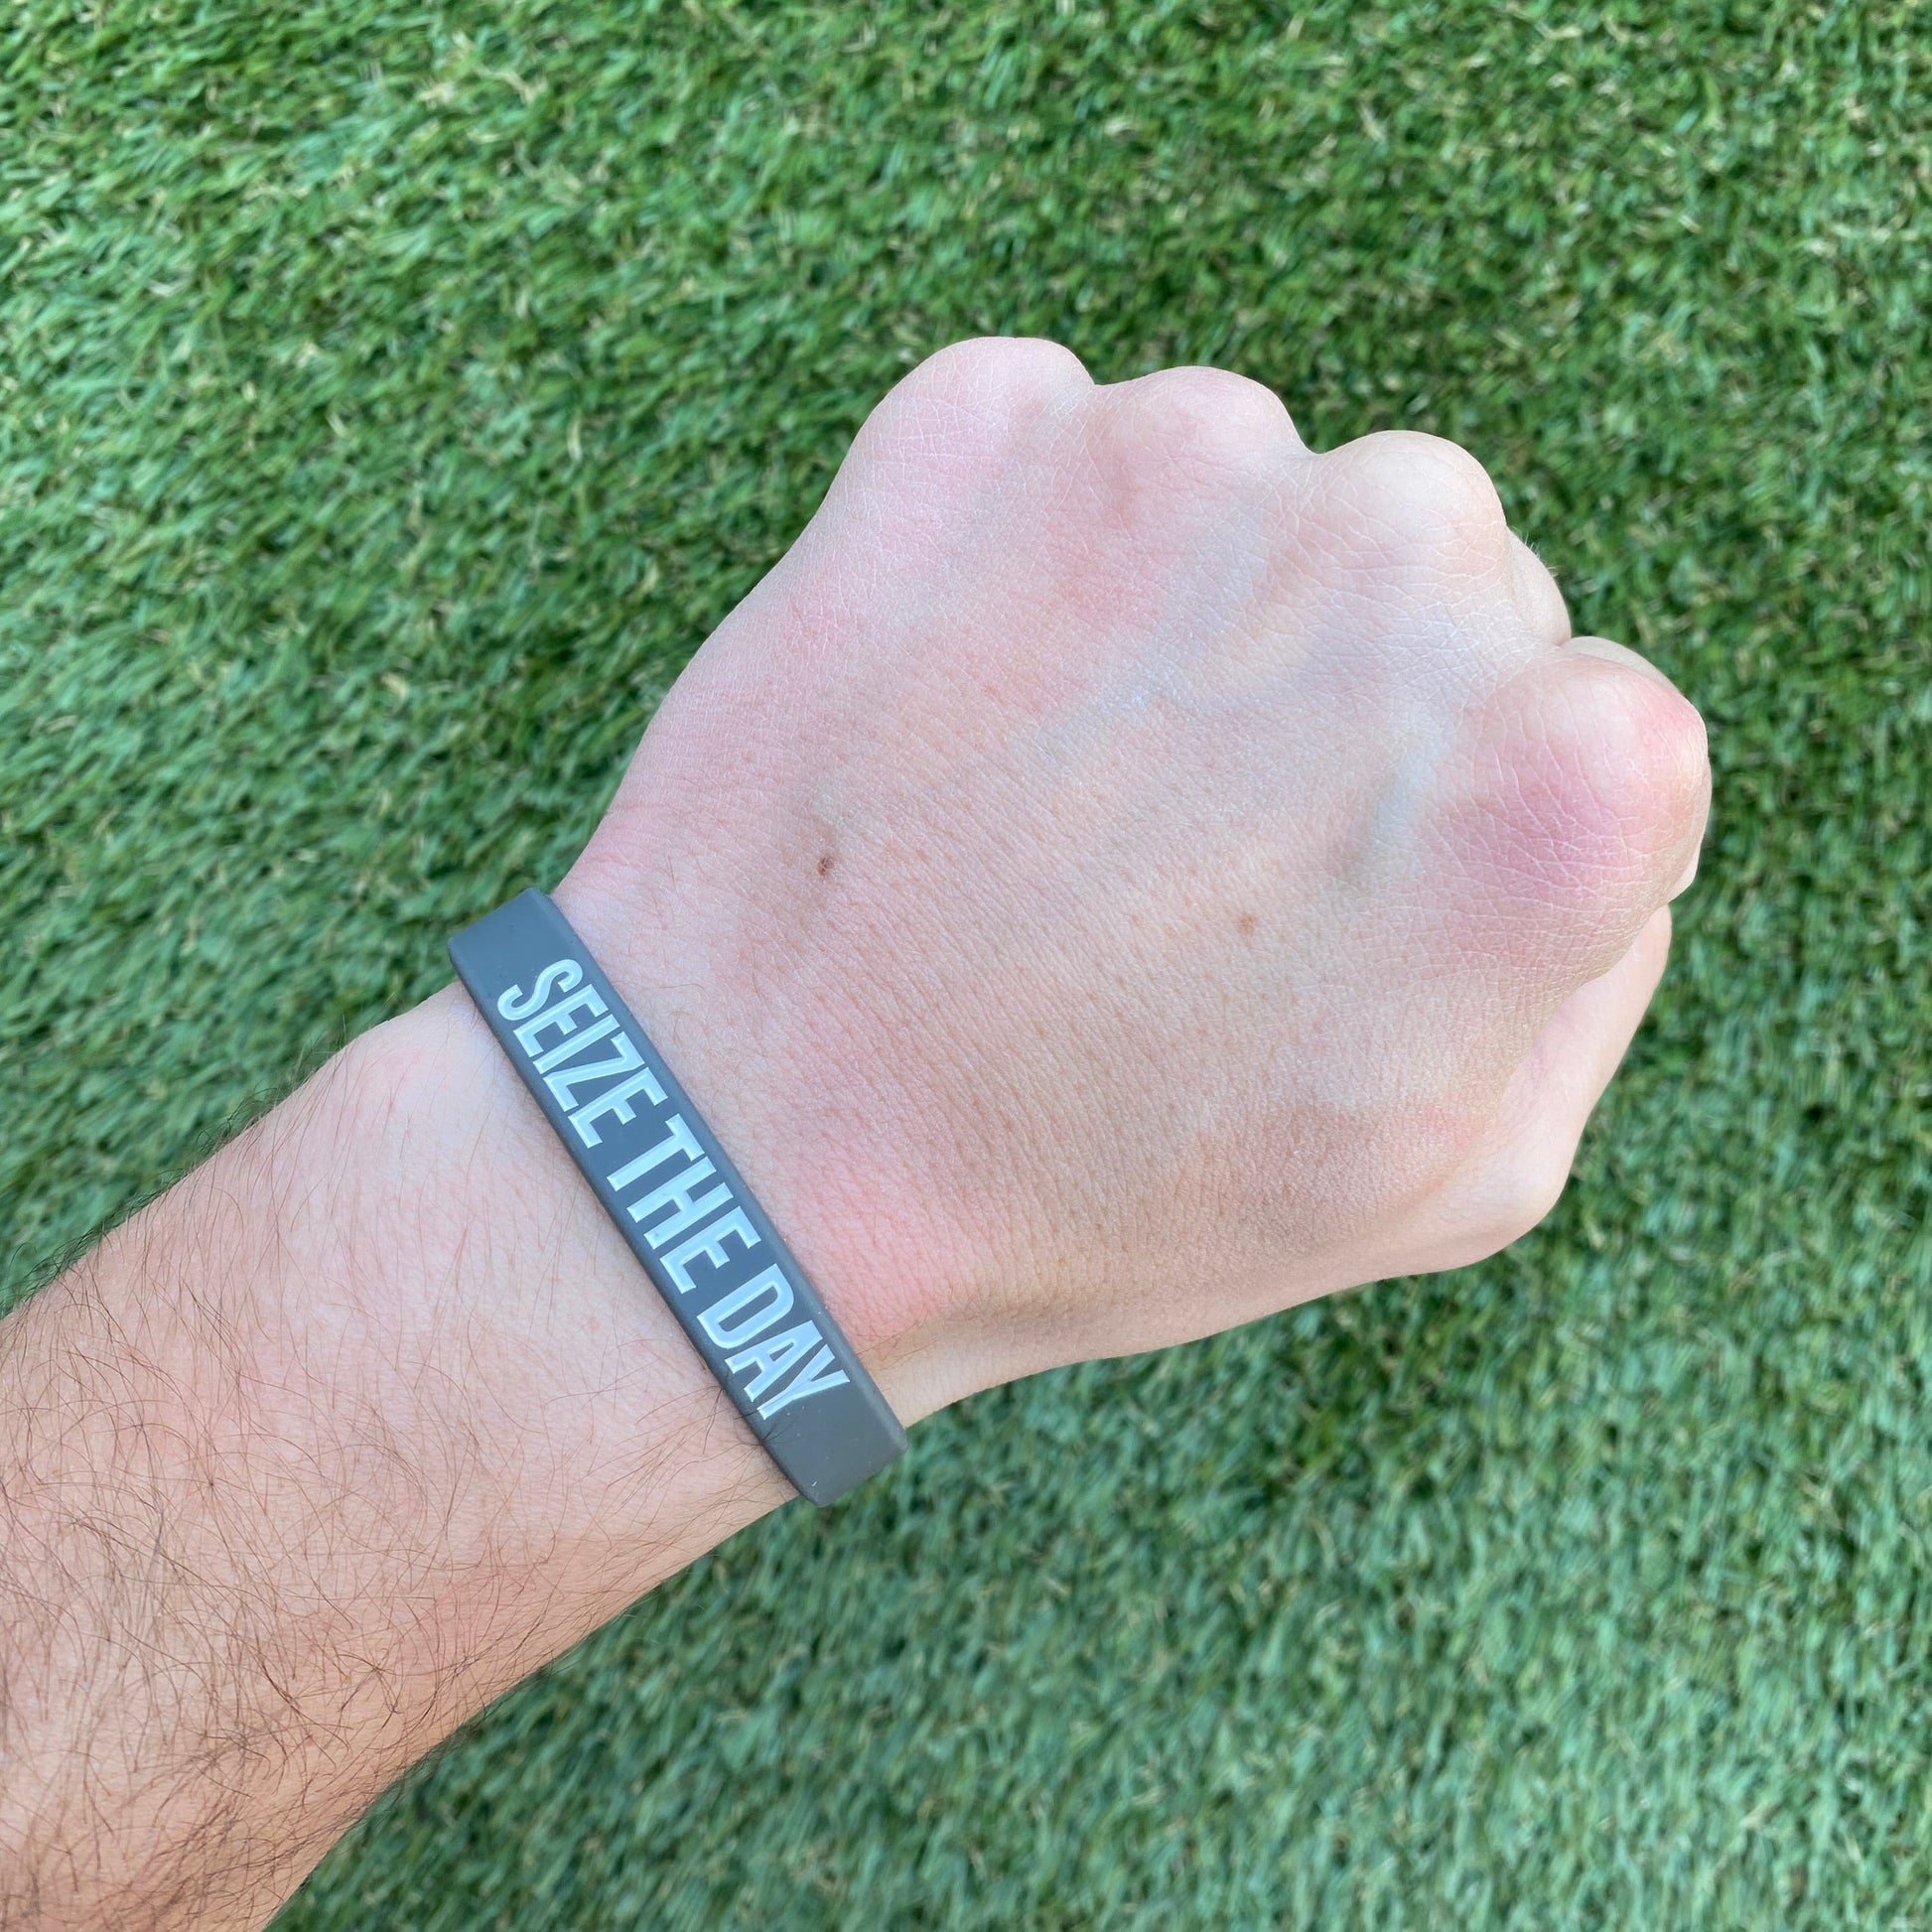 SEIZE THE DAY Wristband - Southern Grace Creations